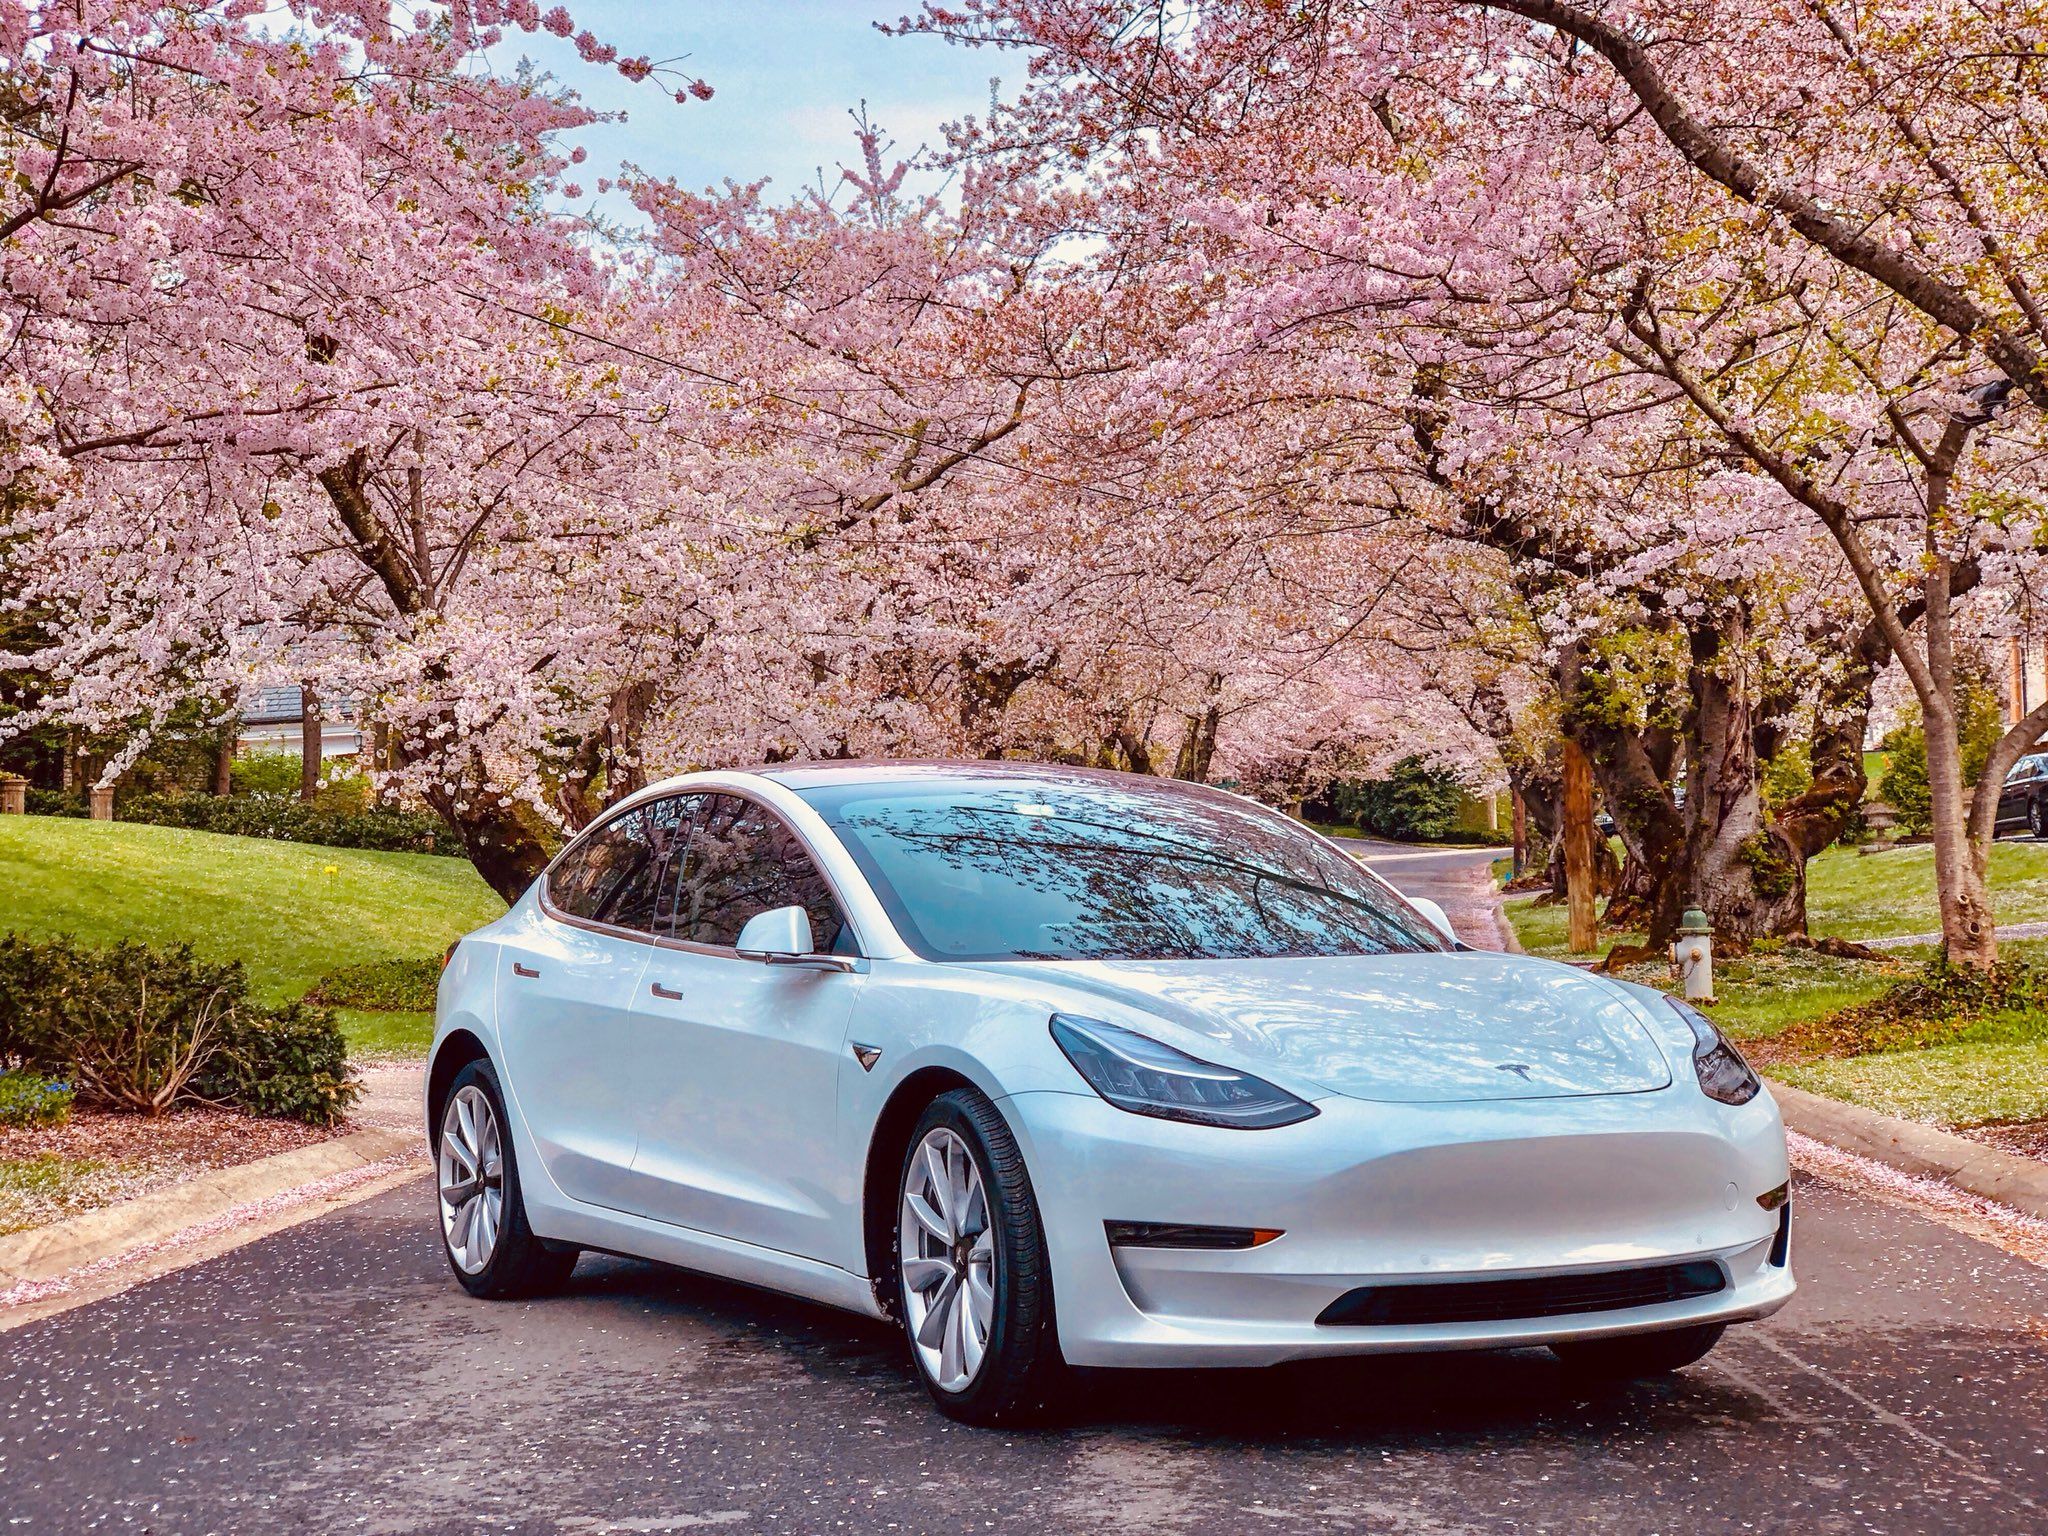 Tesla Model 3 In China Receives Least Complaints vs Top-Selling ICE Cars & EVs